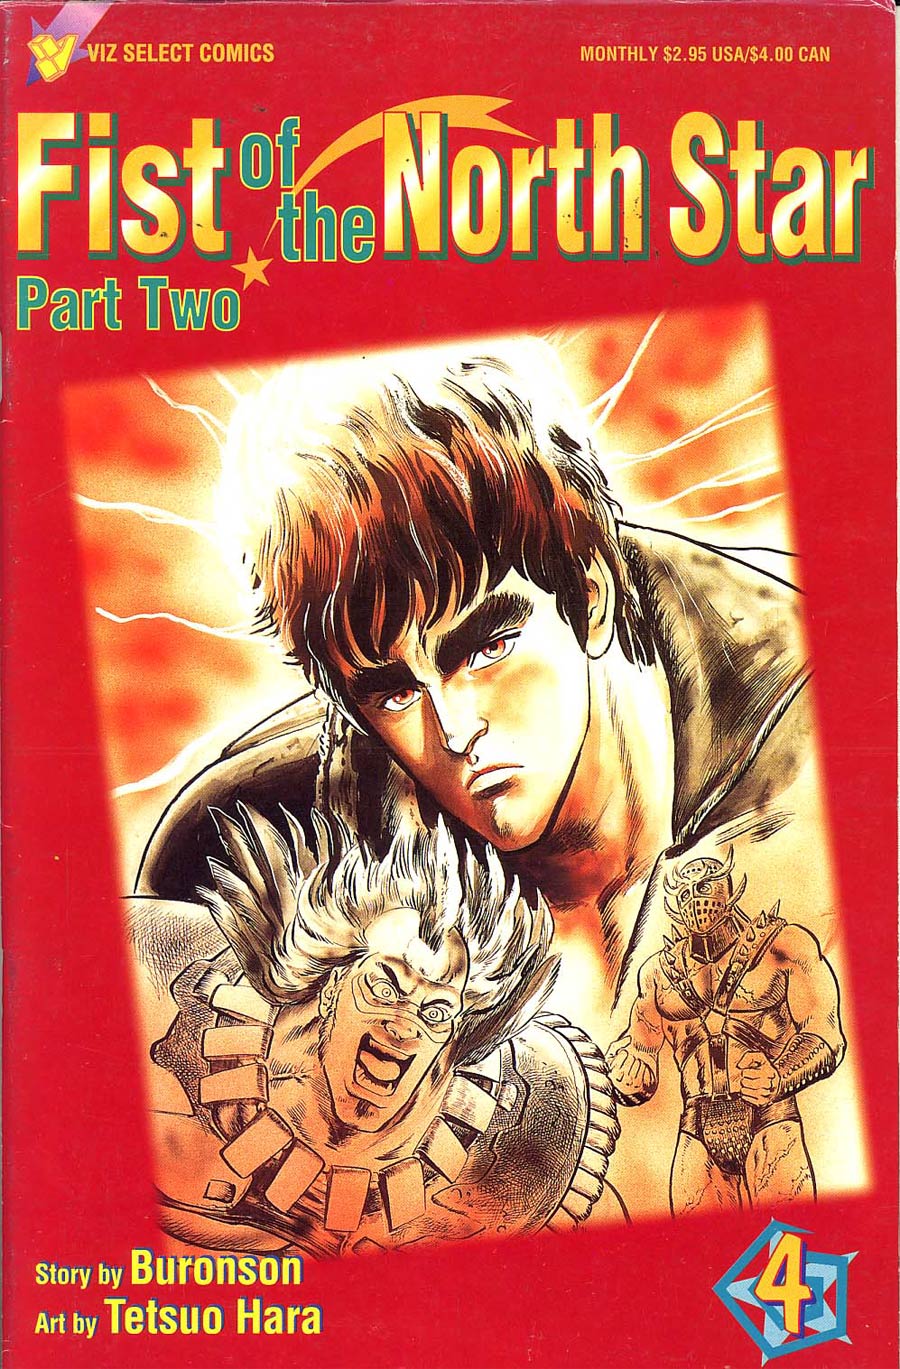 Fist Of The North Star Part 2 #4